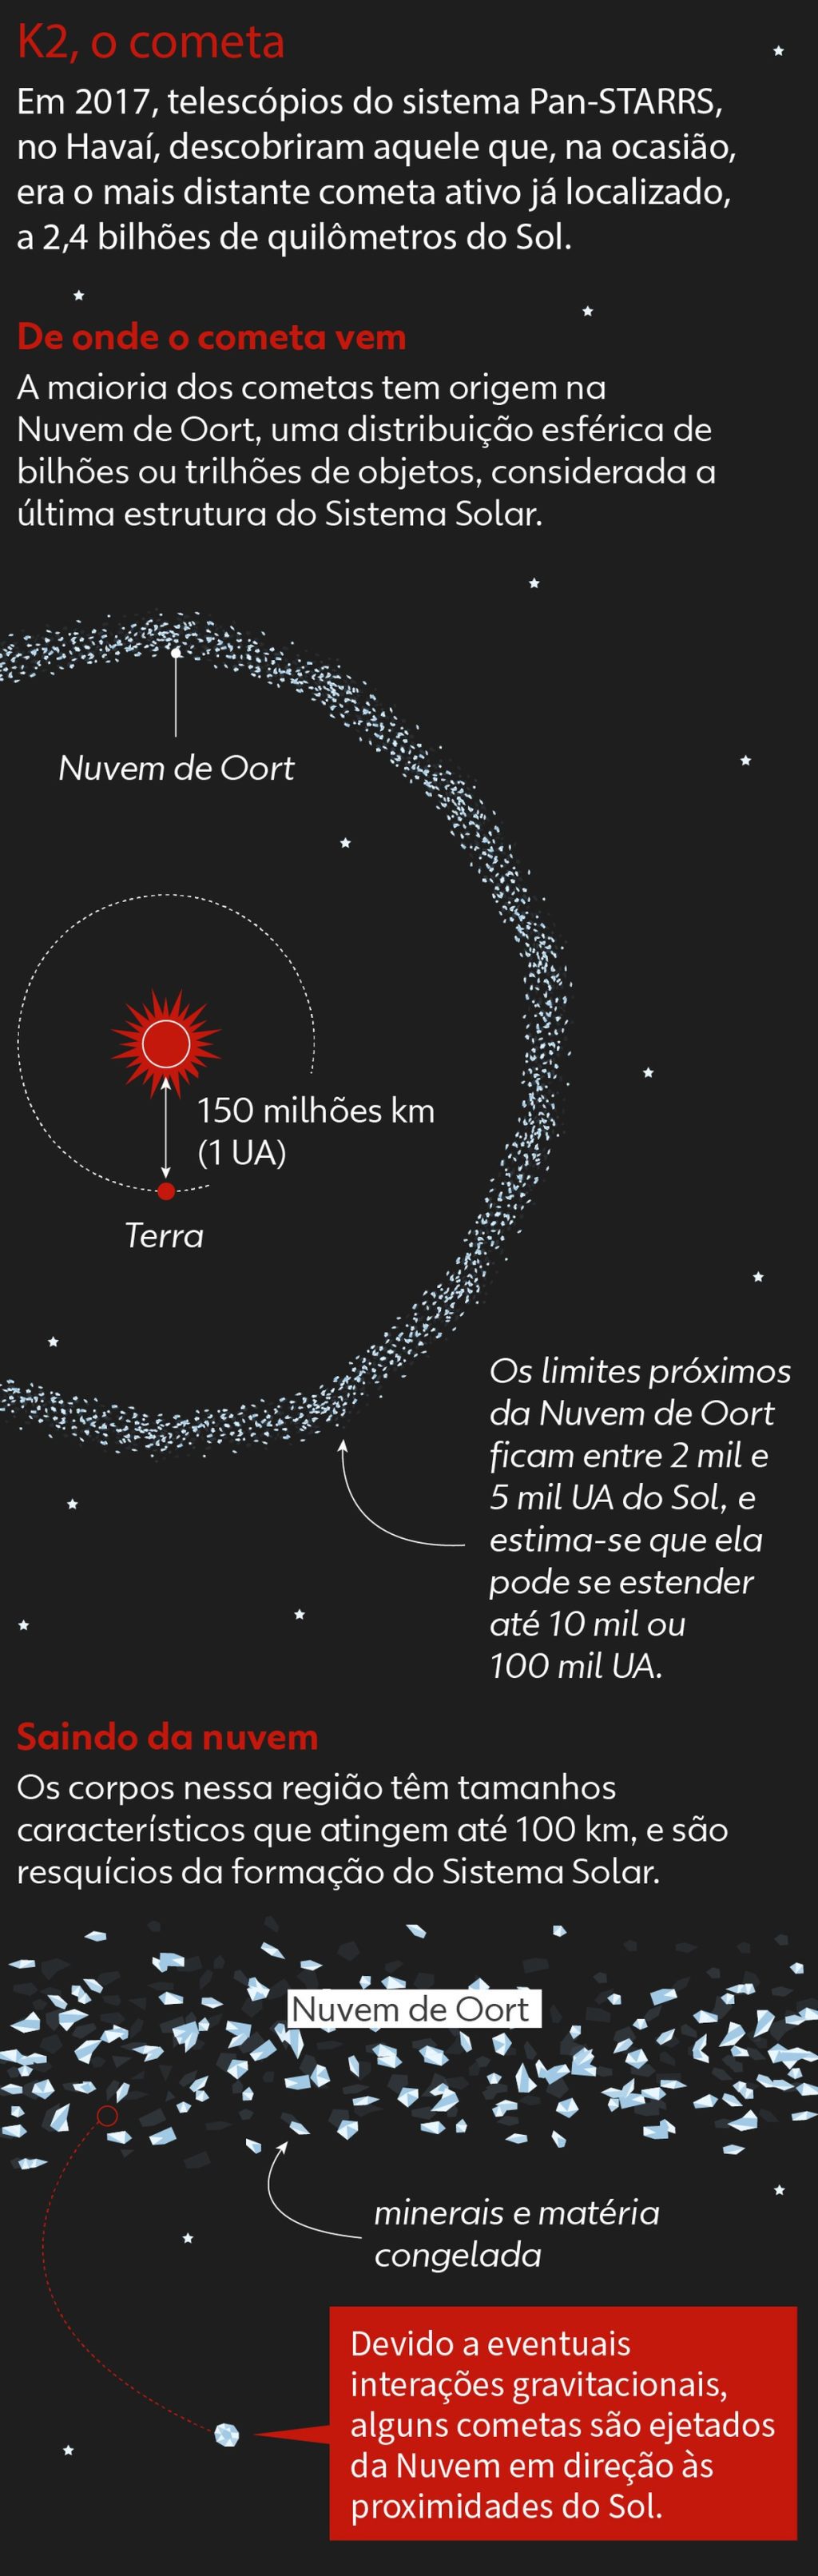 Infographic showing features of comet K2, which will pass near Earth this Thursday |  Santa Catarina